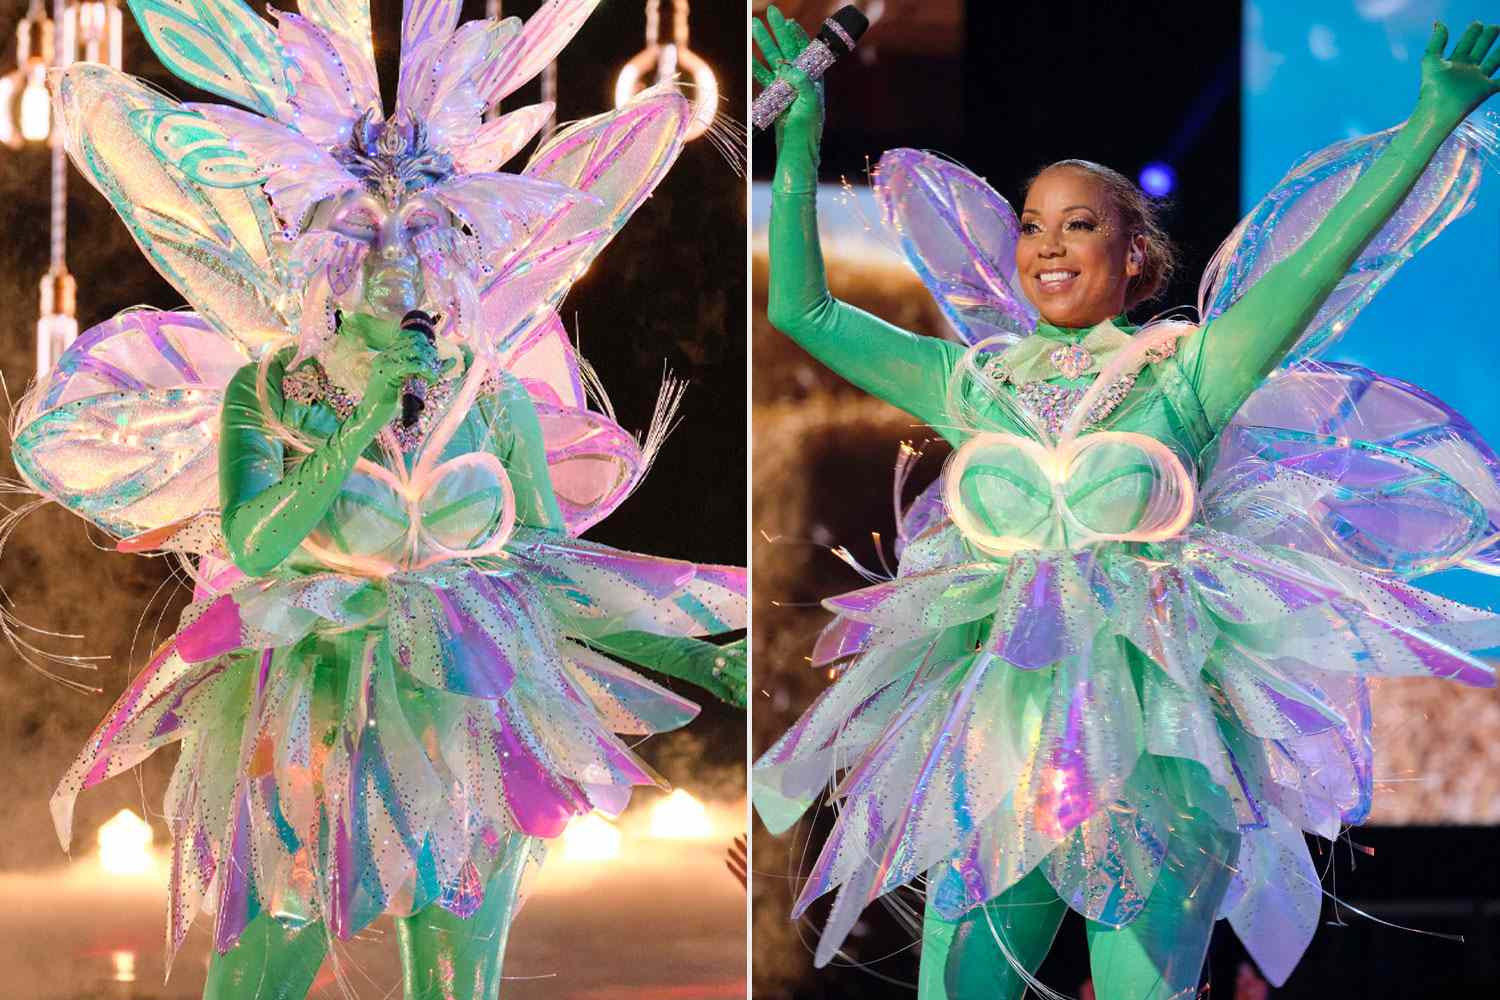 Holly Robinson Peete revealed as Fairy on 'The Masked Singer'